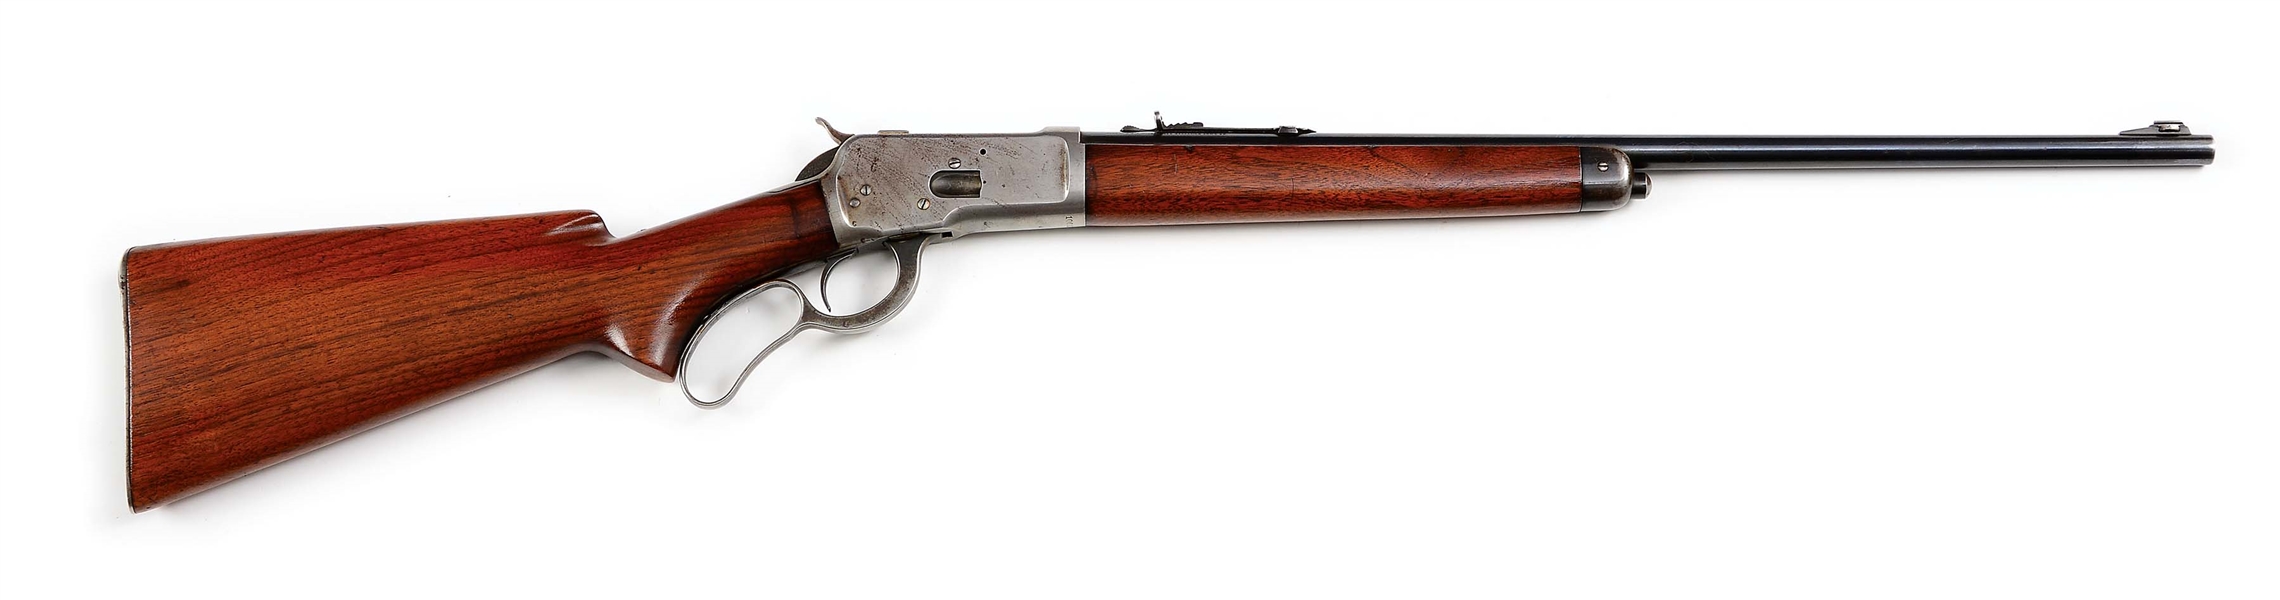 (C) 1ST YEAR PRODUCTION WINCHESTER MODEL 65 LEVER ACTION RIFLE (1933).